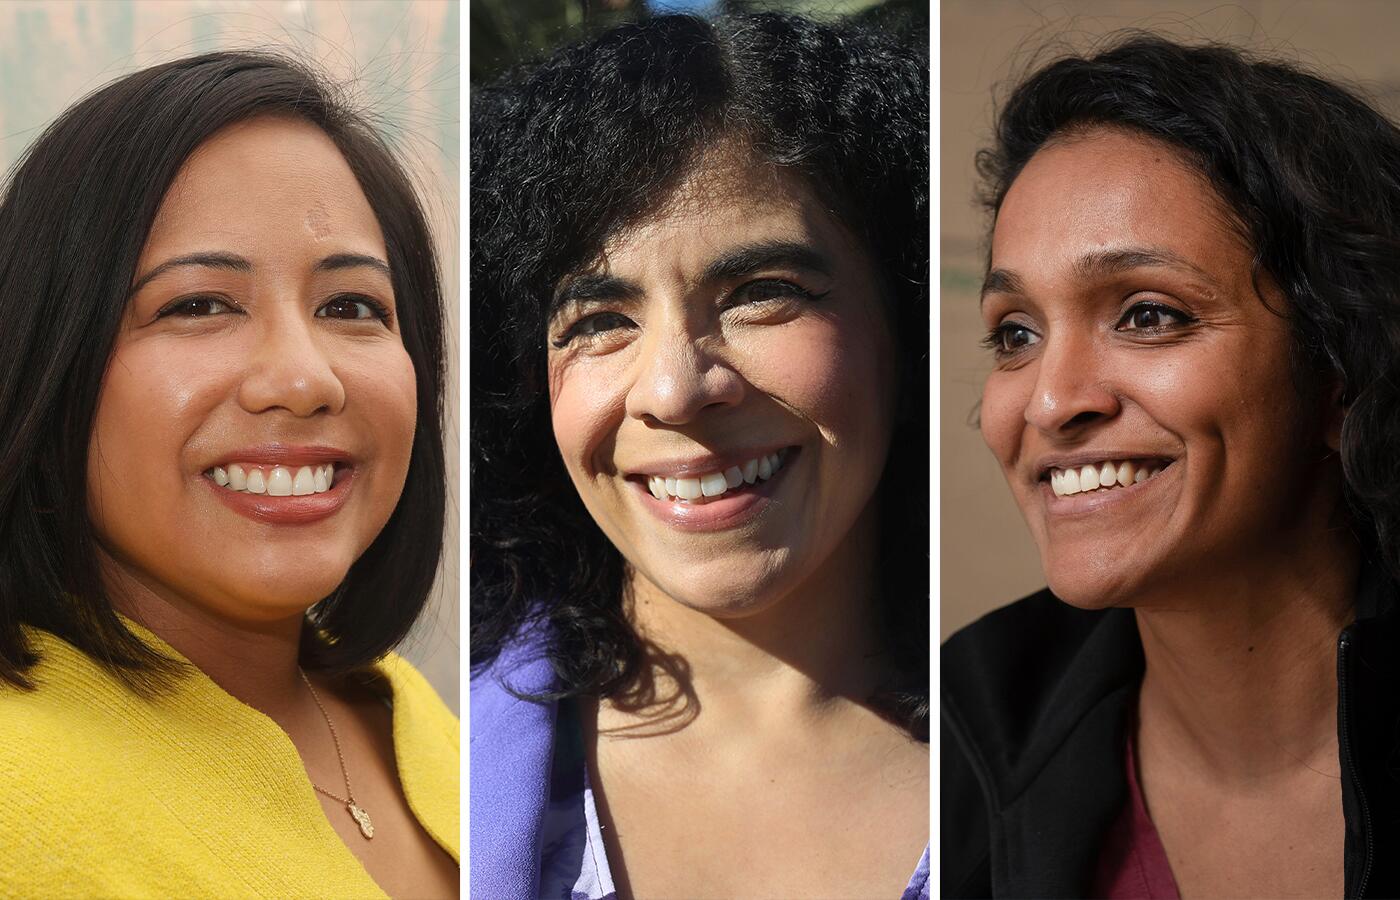 Call them super progressives: L.A.'s political left looks to expand its power at City Hall